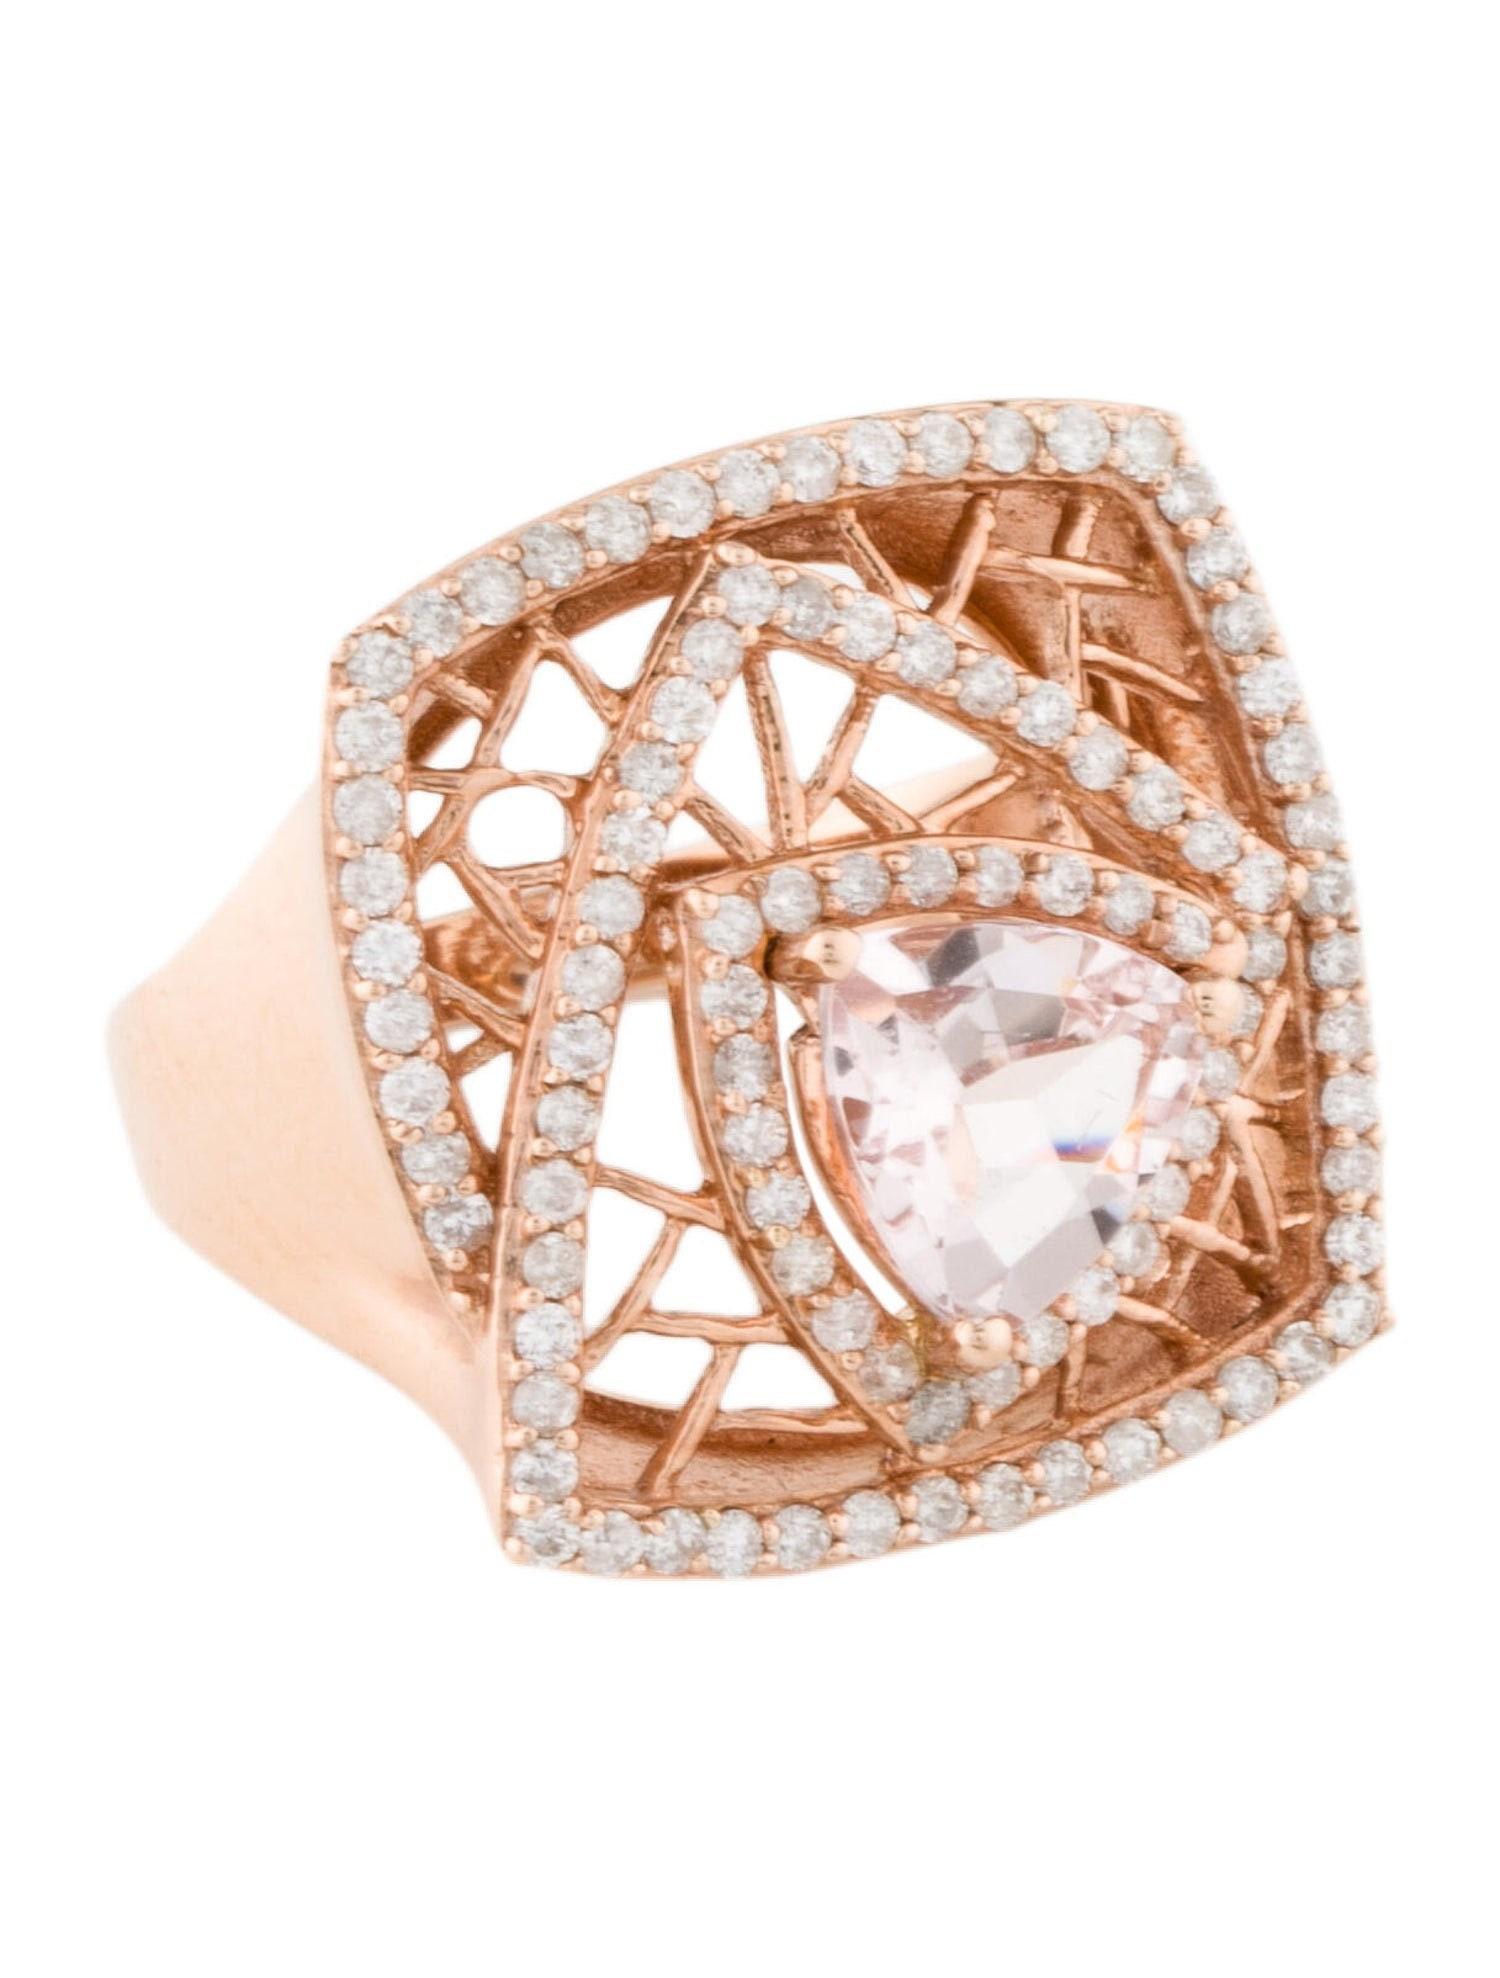 This is a gorgeous natural 1.31 carat morganite and diamond vintage ring set in solid 14K rose gold. The natural trillion cut morganite has excellent peachy color and is surrounded by a halo of round-cut white diamonds. The ring is stamped 14k and a